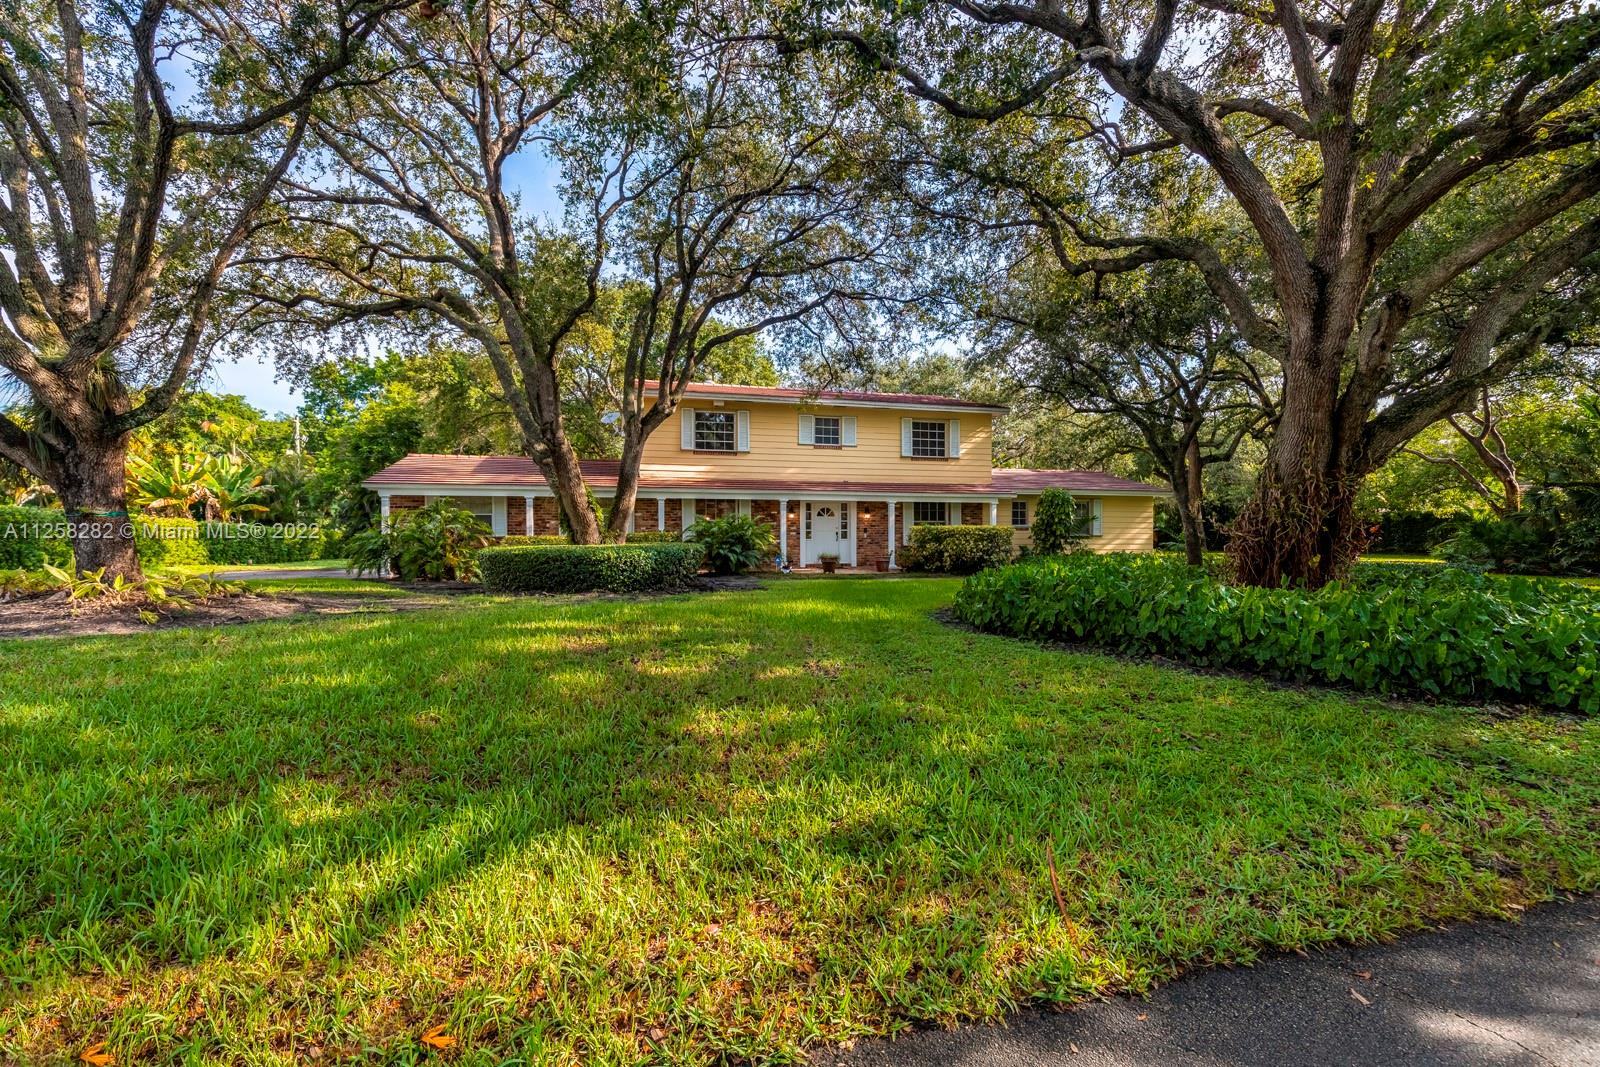 A ranch home that presents the perfect balance between traditional and classic. Welcome to this beautiful 6 bed, 4 full bath, and 1 half bath home, spanning 3,598 sq. ft of living space, located in the heart of Pinecrest. Immediately upon entering the home, residents will find a wrap-around porch that’s encapsulated with character and is under the cover of beautiful oak trees. The interior features a large open floor plan, featuring a spacious living room, dining room, and gourmet kitchen detailed with luxury accouterments. Here, residents will find the ideal destination to entertain with an abundance of natural sunlight filling the room from every angle. One of the highlights of the residence is the covered pool deck that makes hosting family and friends inviting and easy.